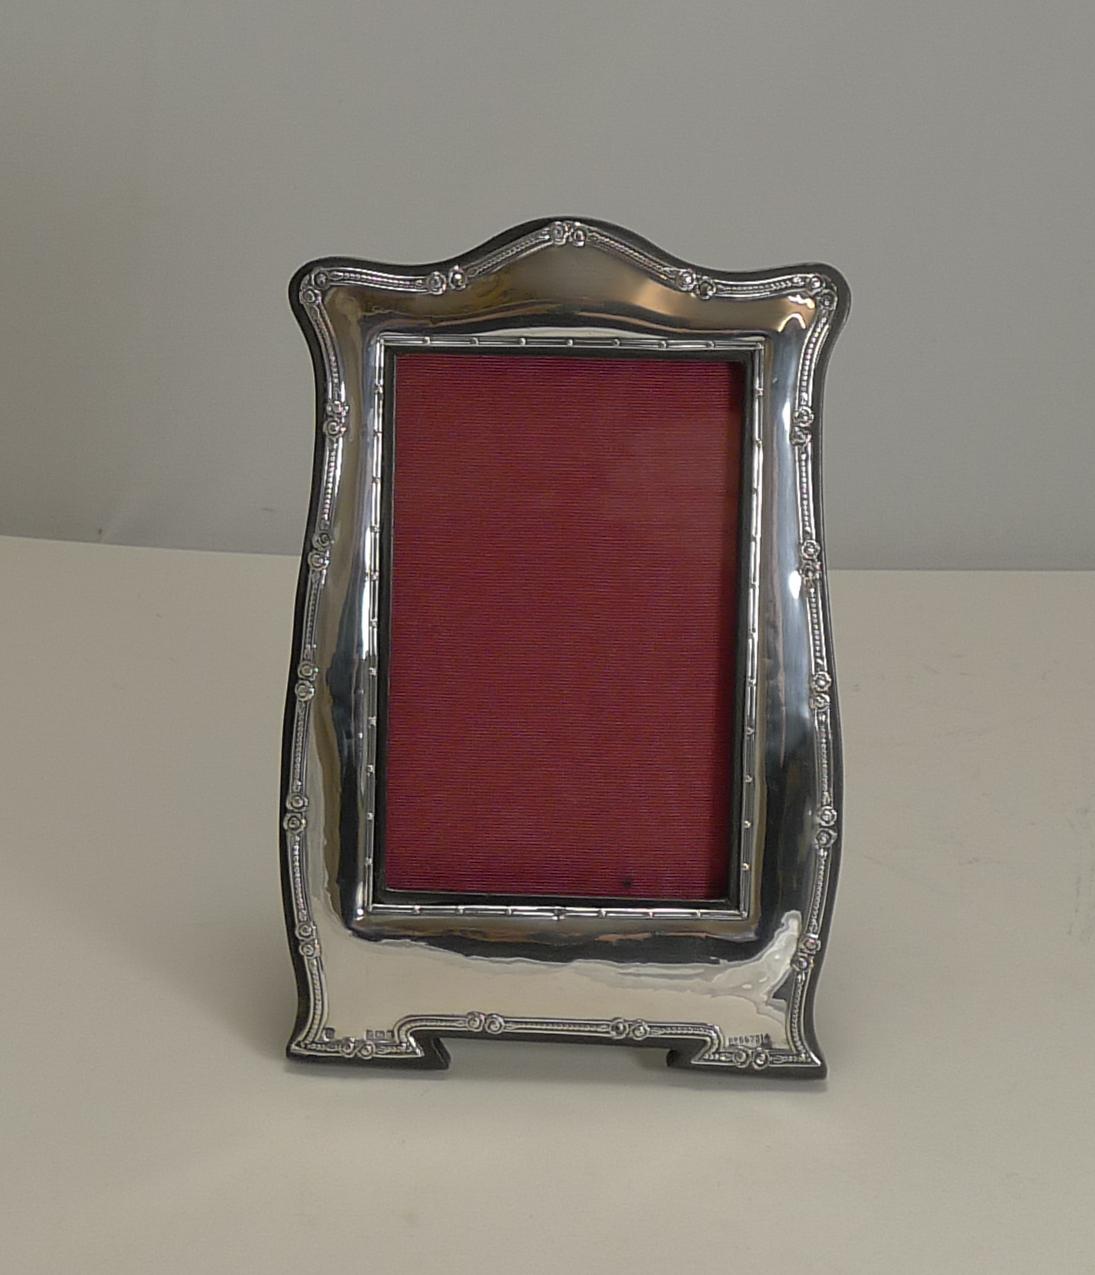 Antique English Art Nouveau Photograph Frame in Sterling Silver (Englisch)